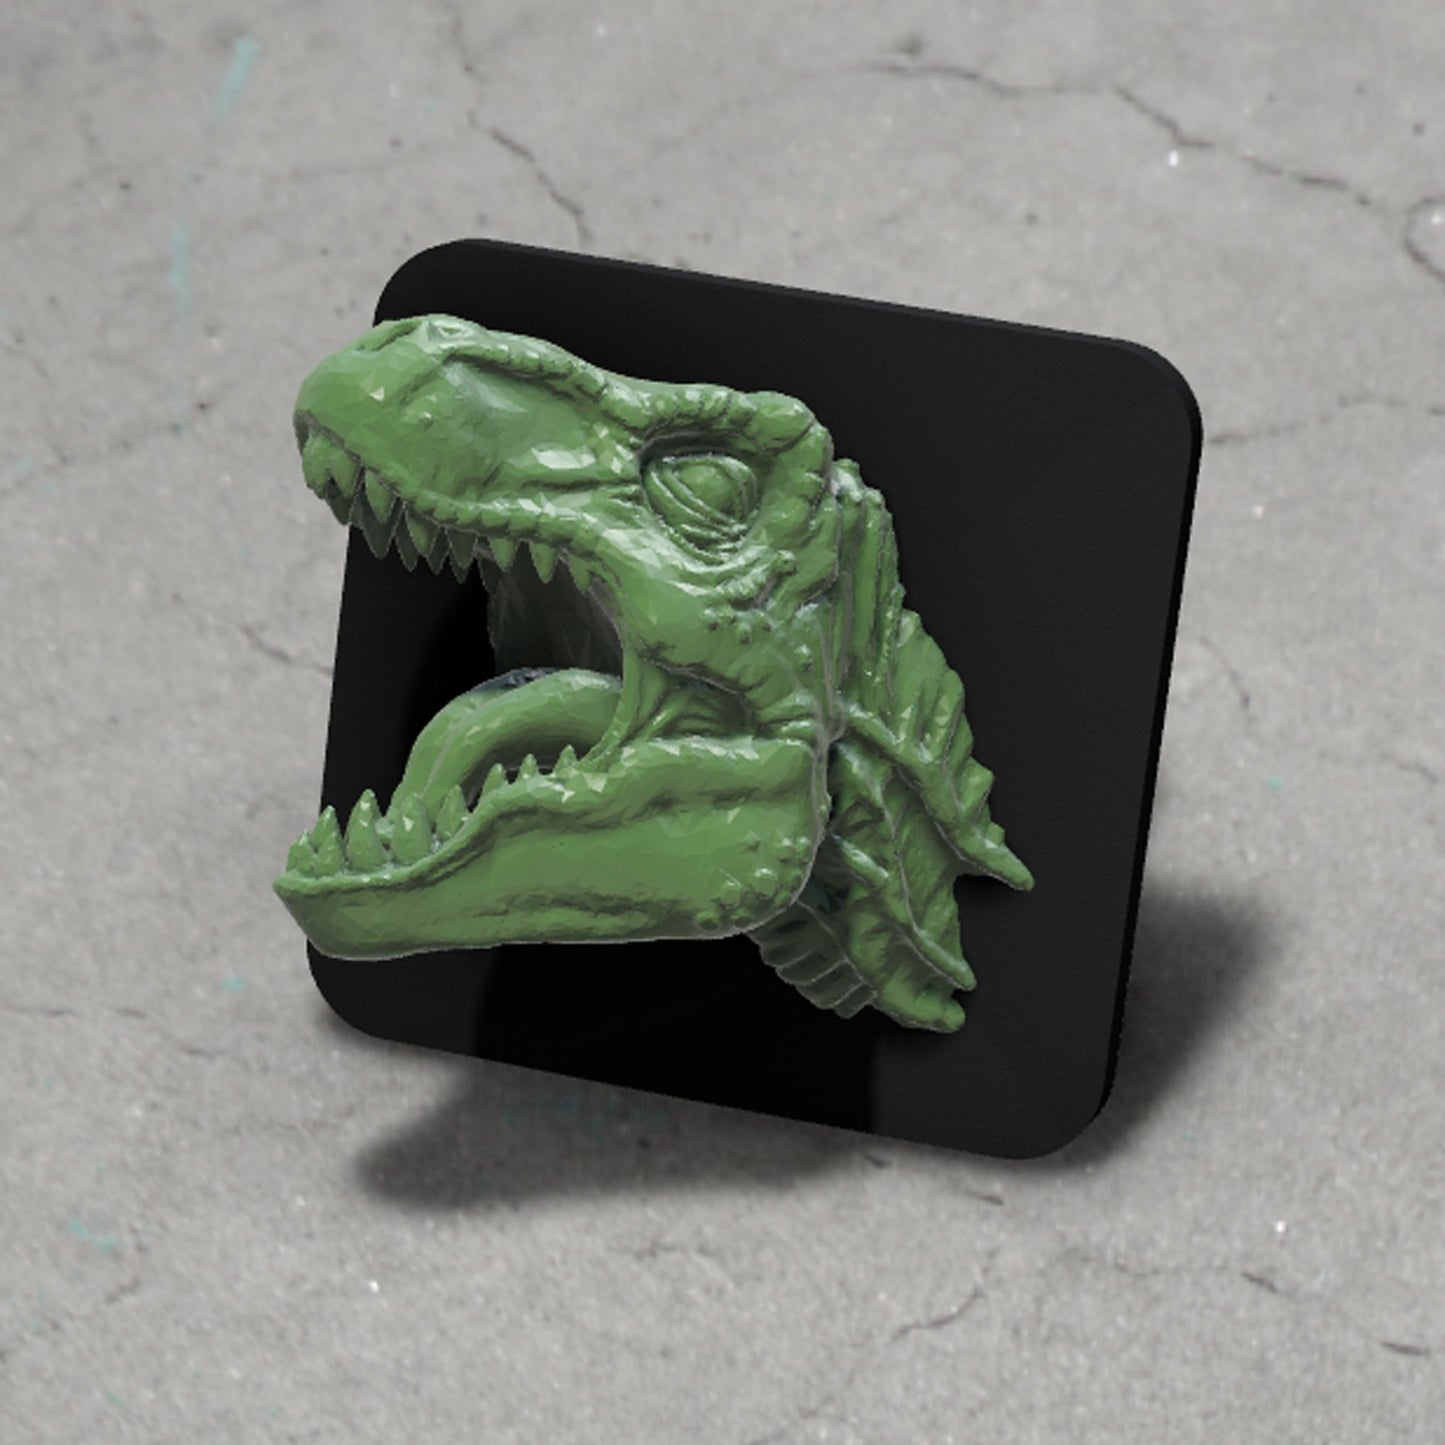 Tyrannosaurs Rex - T-Rex Hitch Plug For 2 inch Receiver